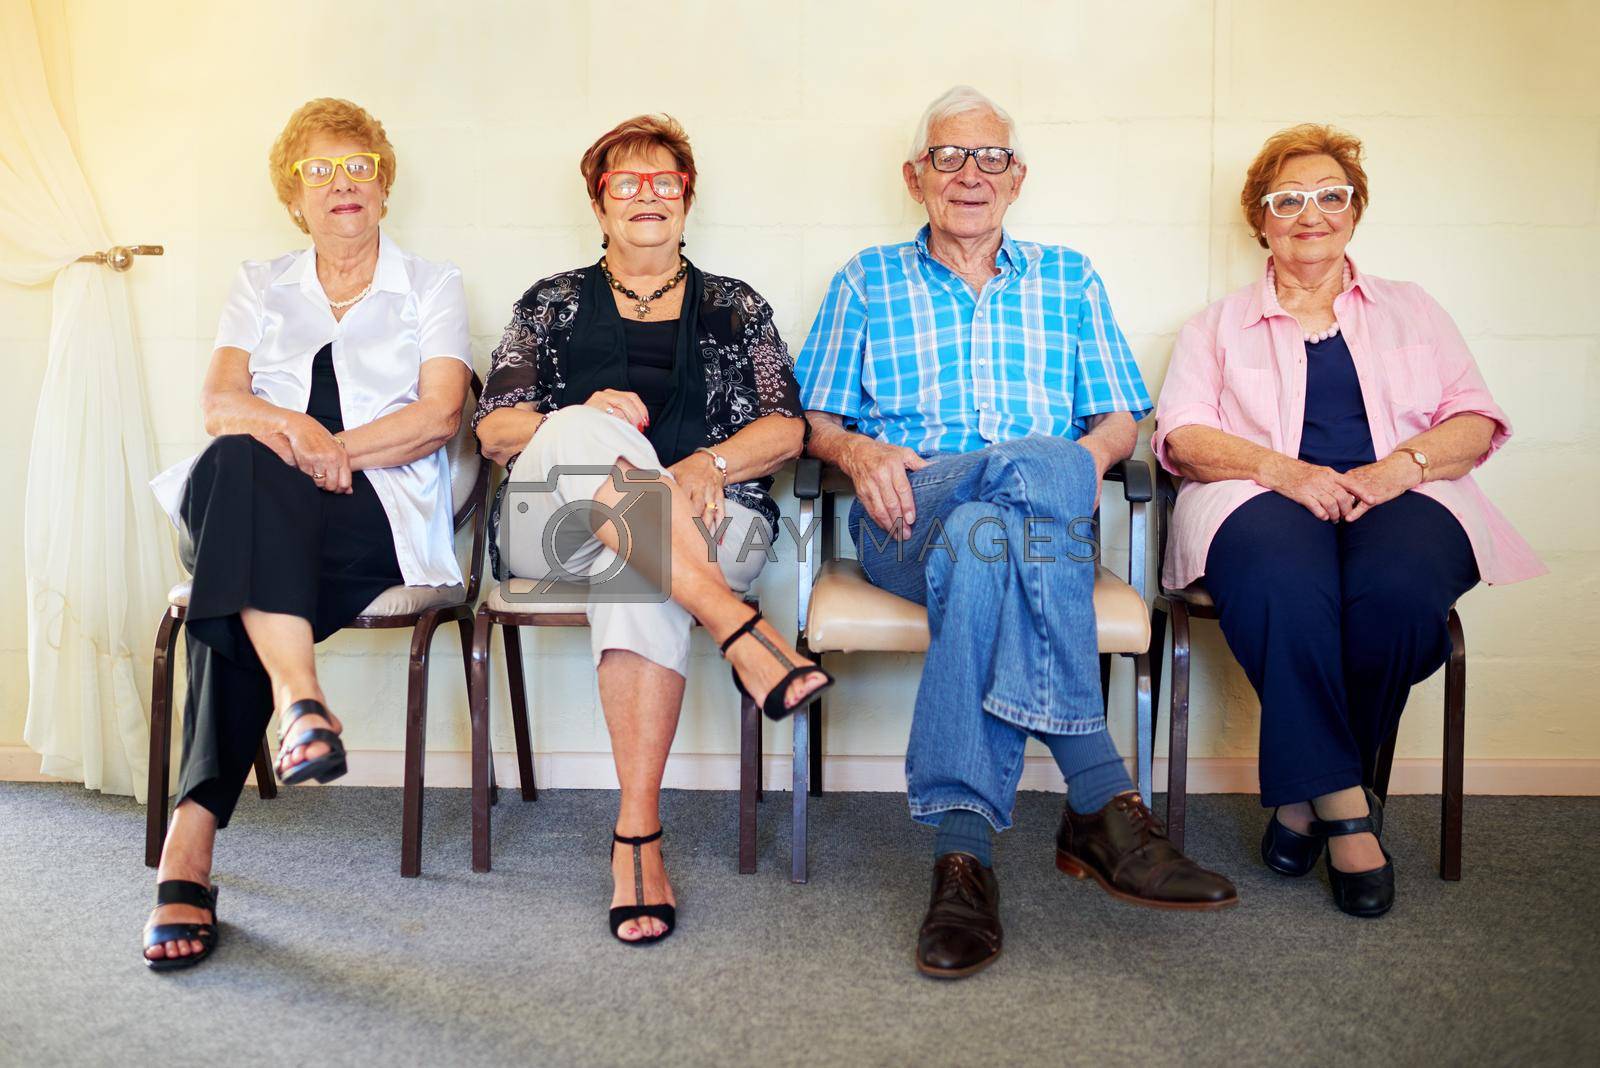 Shot of a group cheerful elderly people smiling and posing for the camera inside of a building.